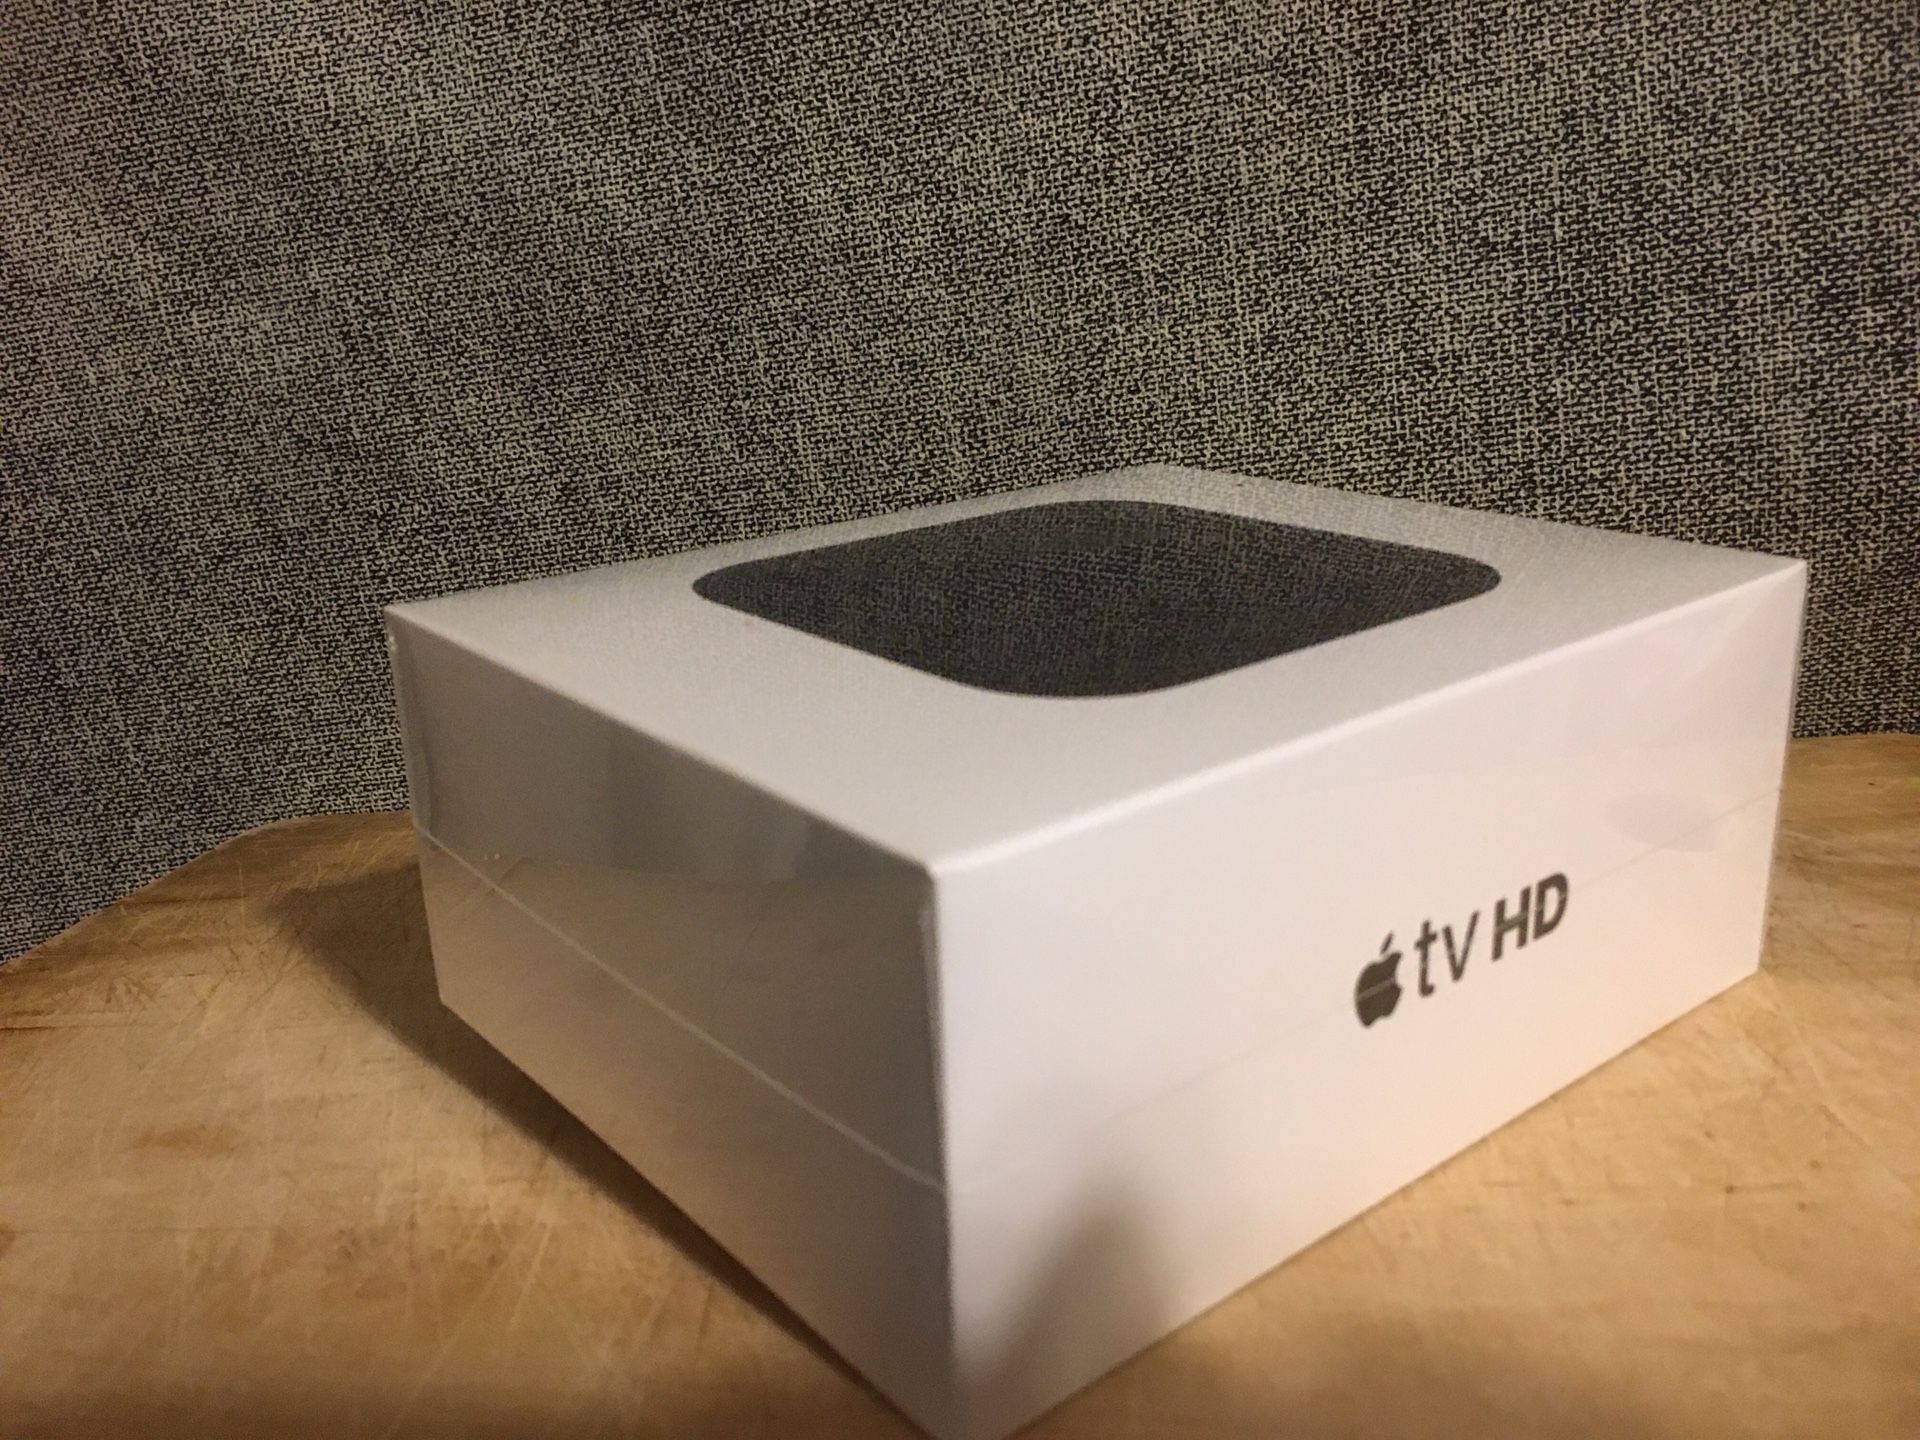 Apple TV HD - 4th Generation (never opened)